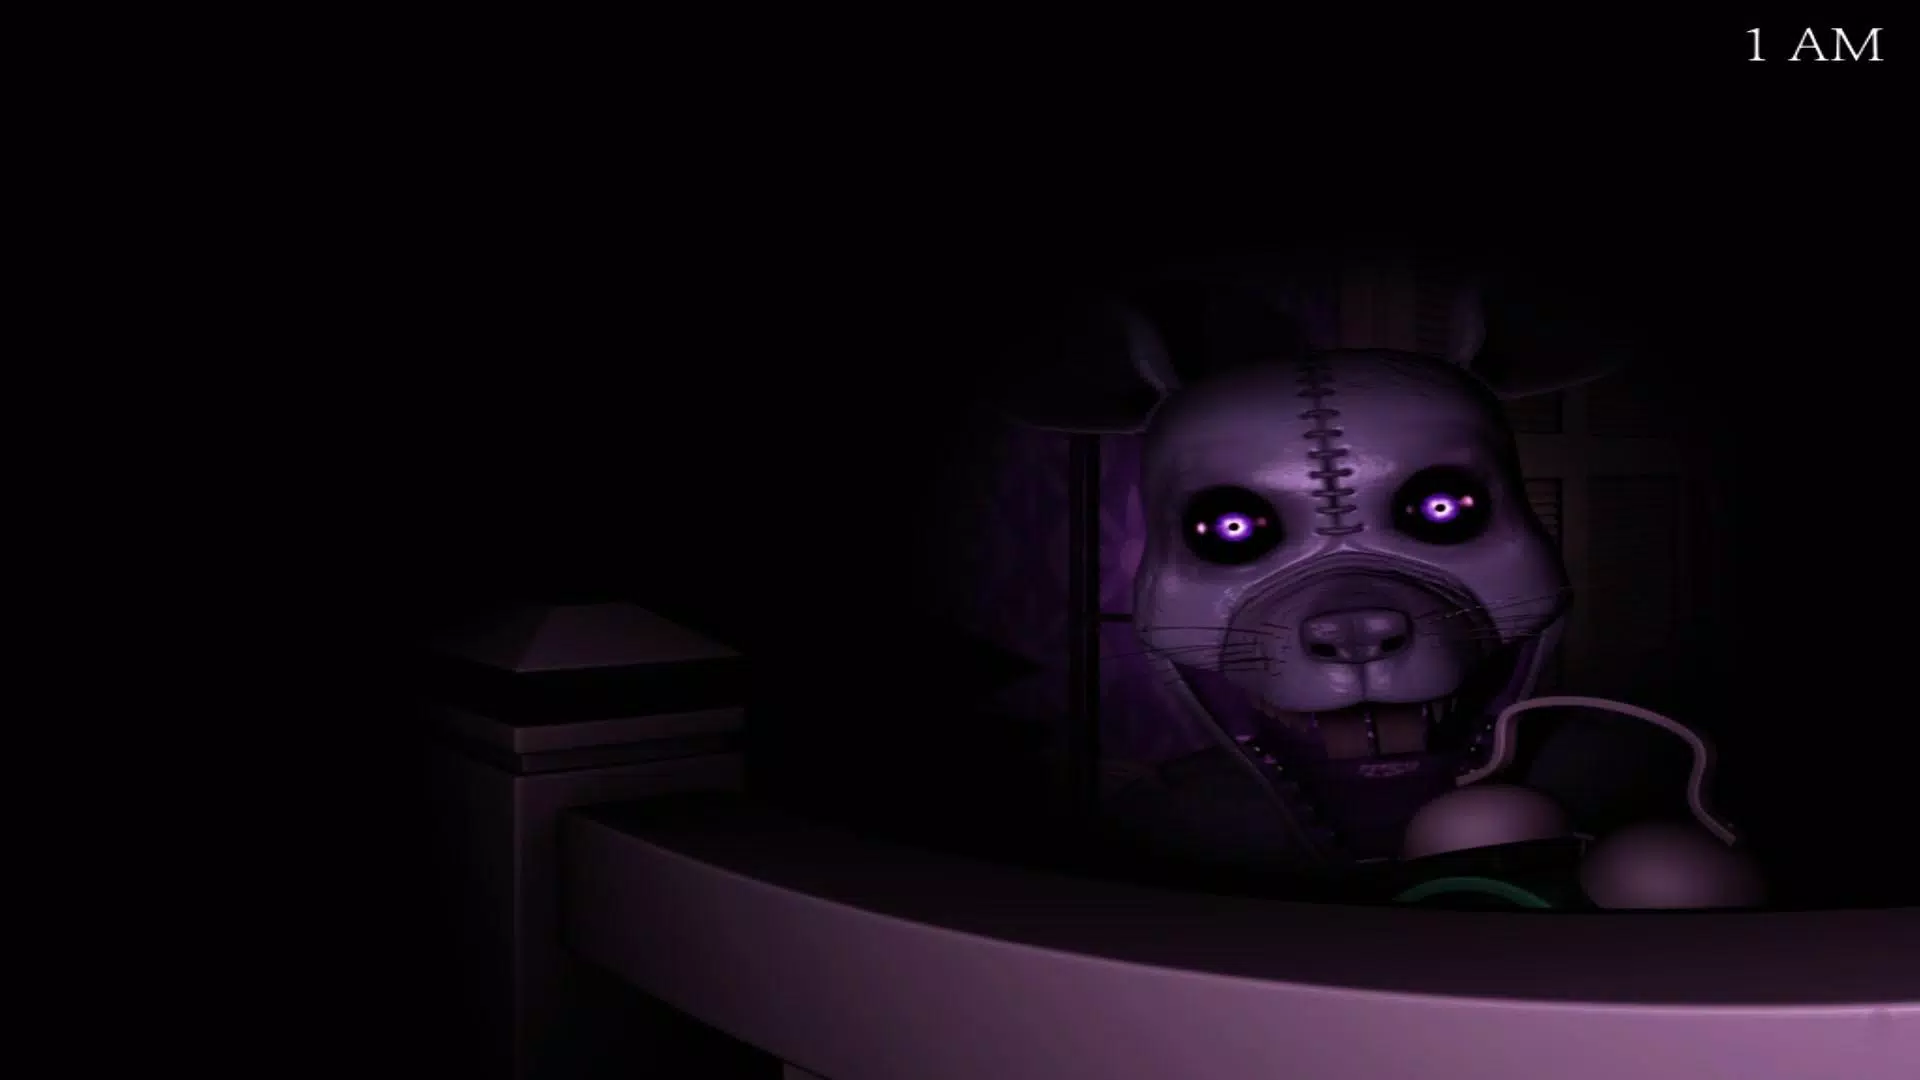 Five Nights At Candy's 3 APK Android Free Download